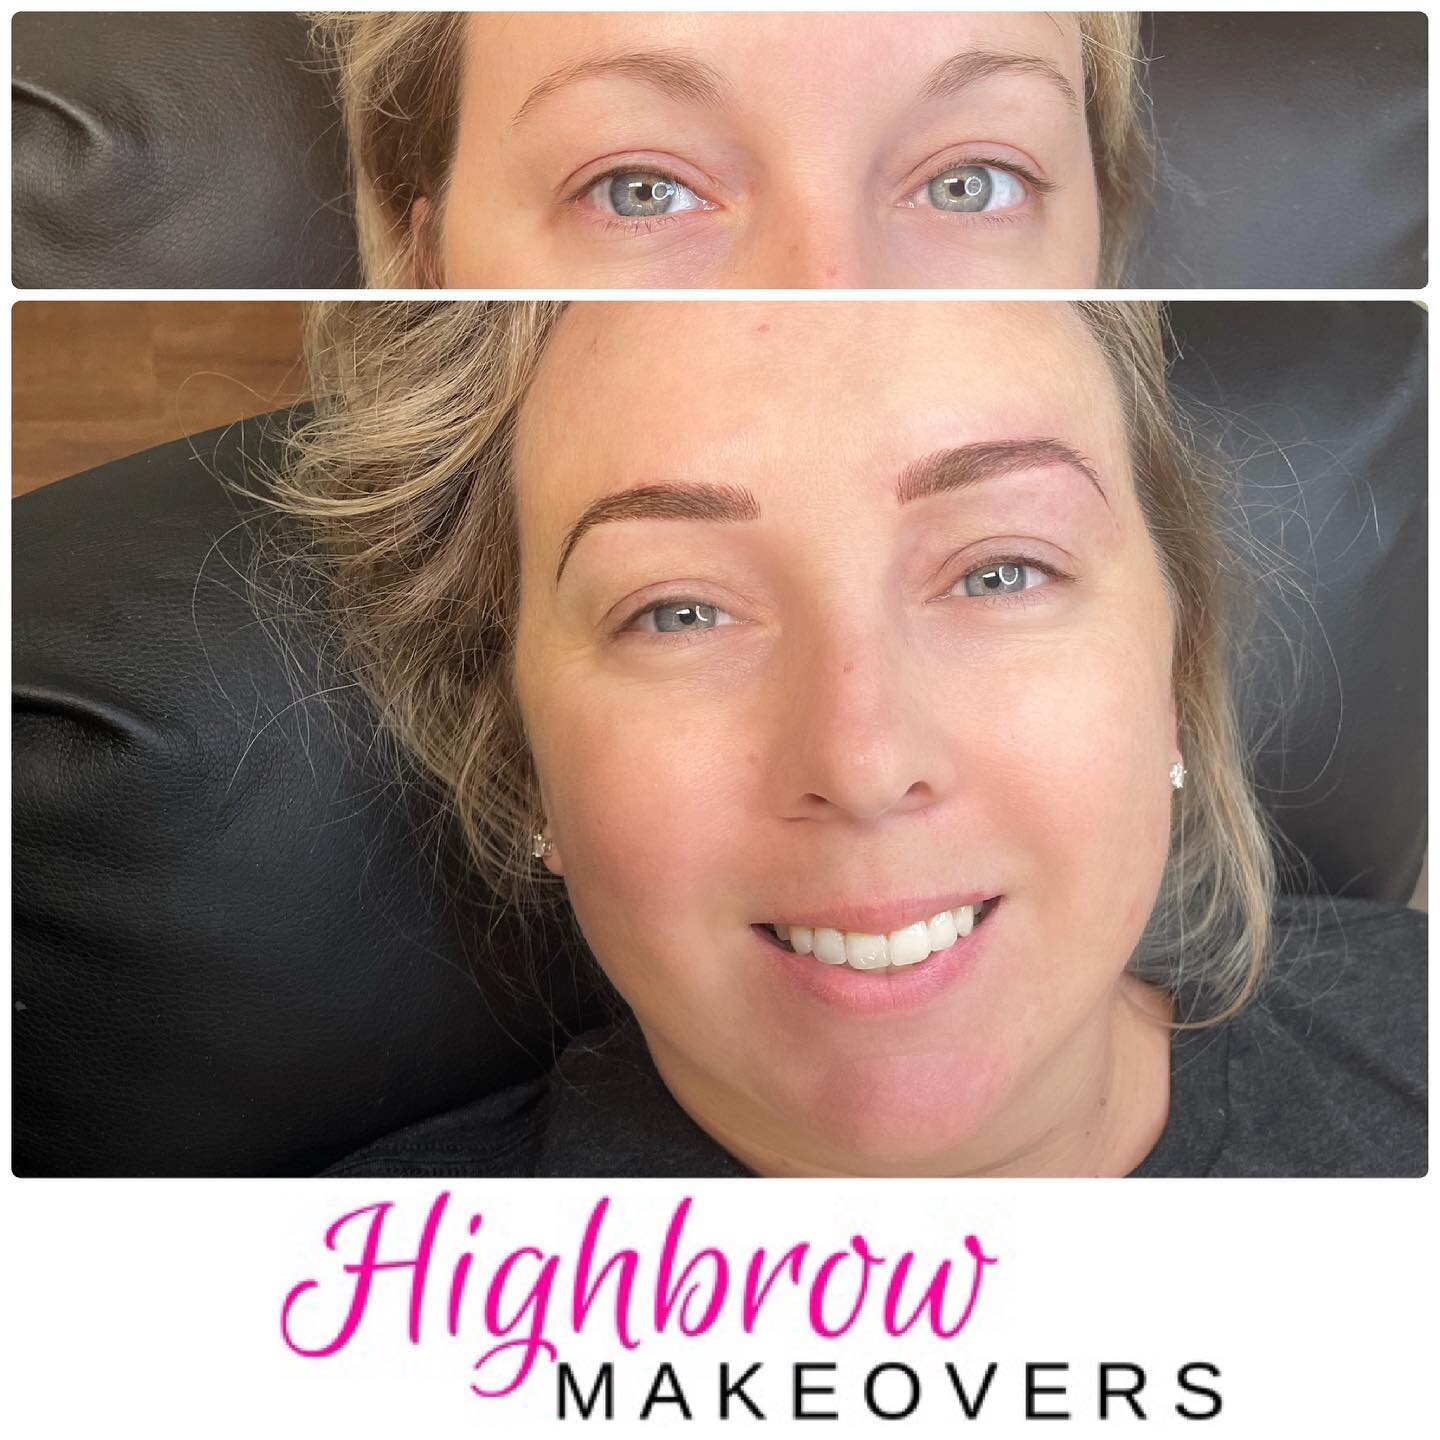 Beautiful person, beautiful brows 😍 Whatever your brow goals are, let&rsquo;s reach those goals together!  Book today at highbrowmakeovers.com